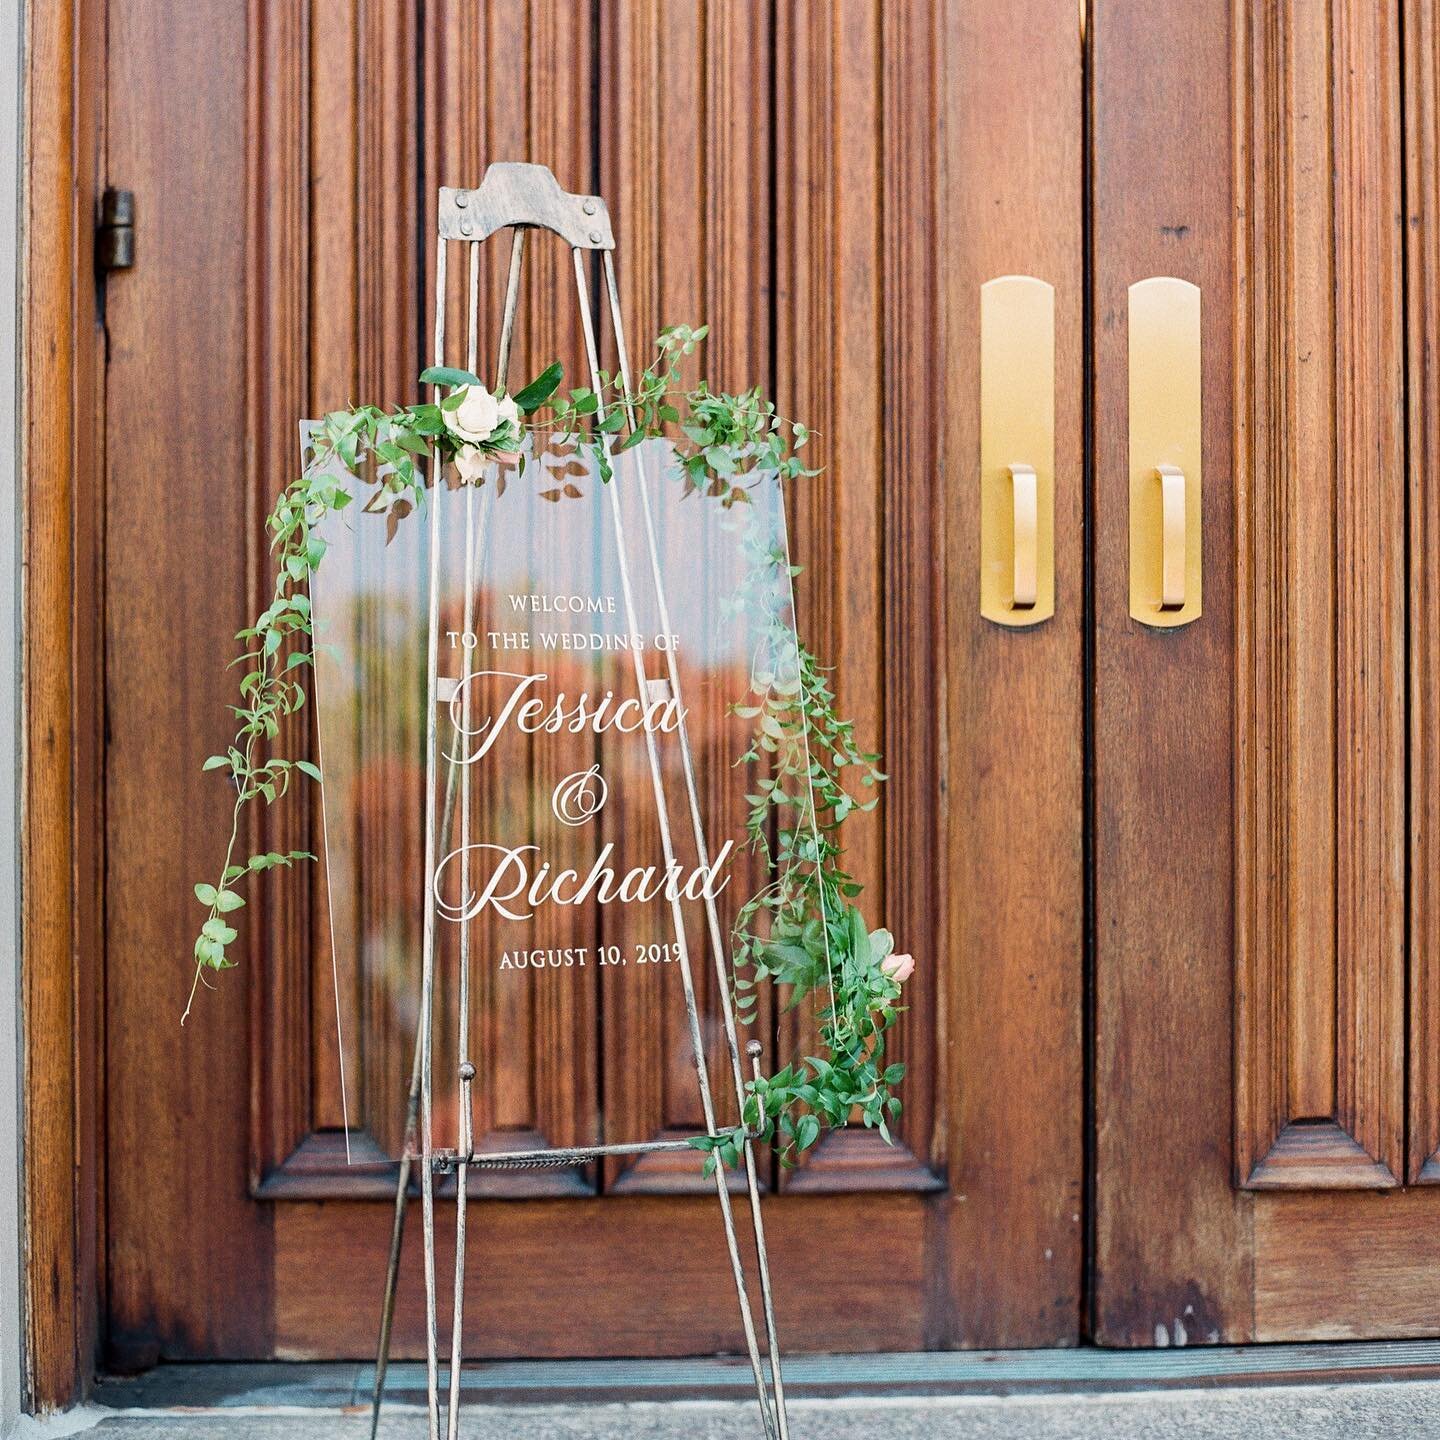 You know what I love about wedding welcome signs? They can be reused! Its debut can be at the ceremony space, then your coordinator can bring it to the entrance of your reception. Two for the price of one! In that case it&rsquo;s worth paying up for 